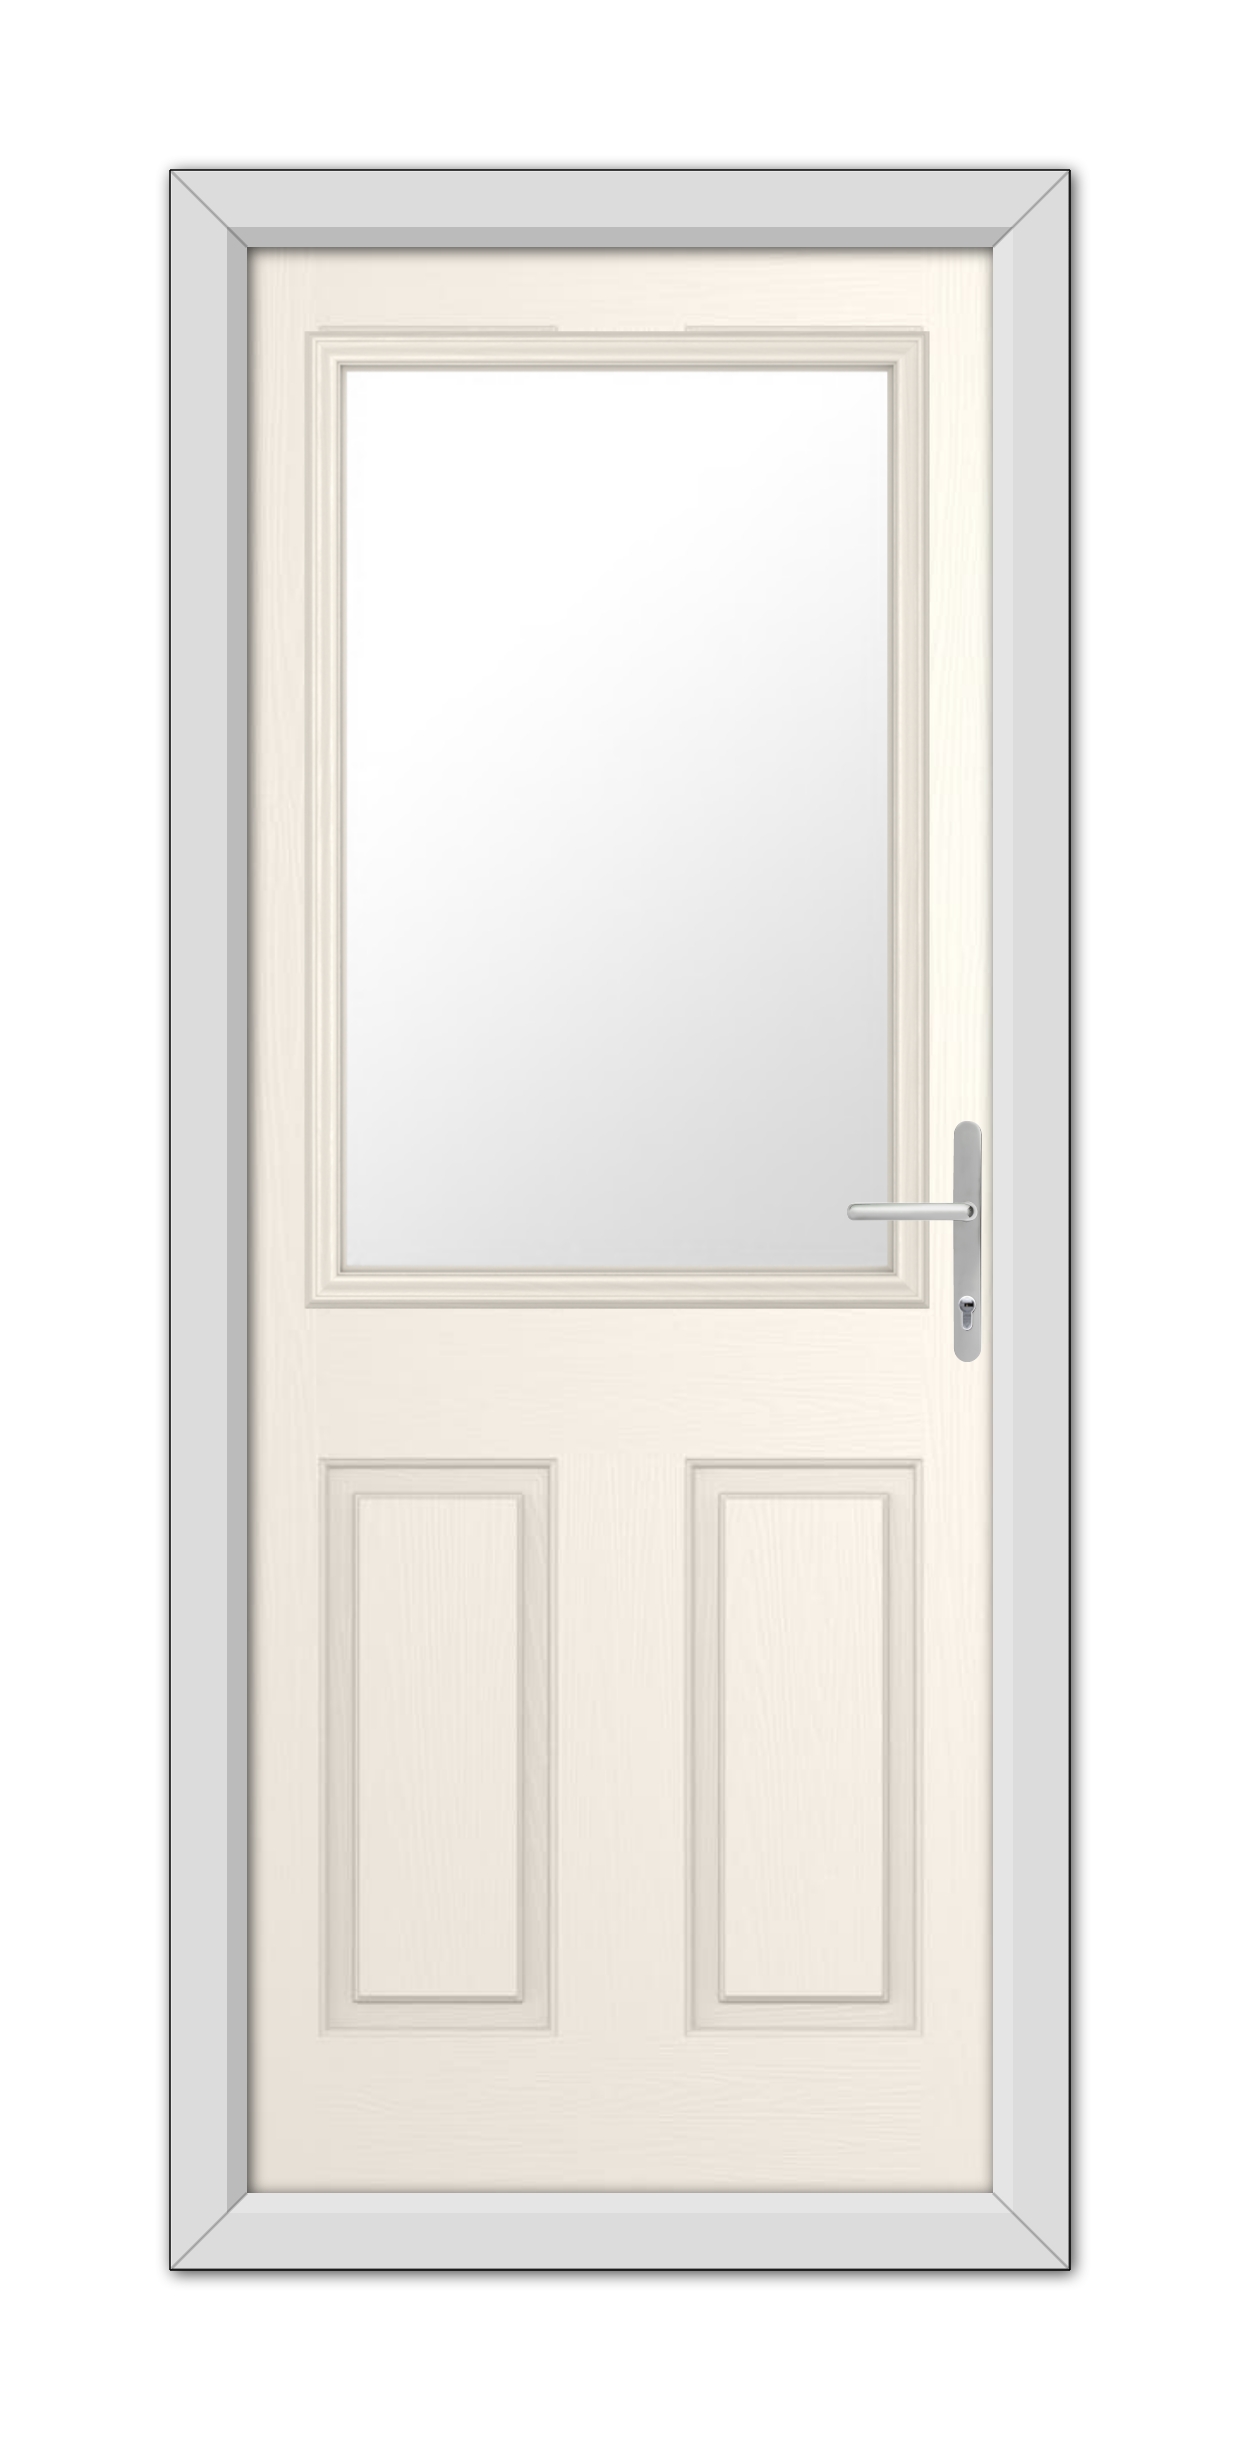 A modern White Foil Buxton Composite Door with a clear glass window on the top half and a silver handle, set within a simple gray frame.